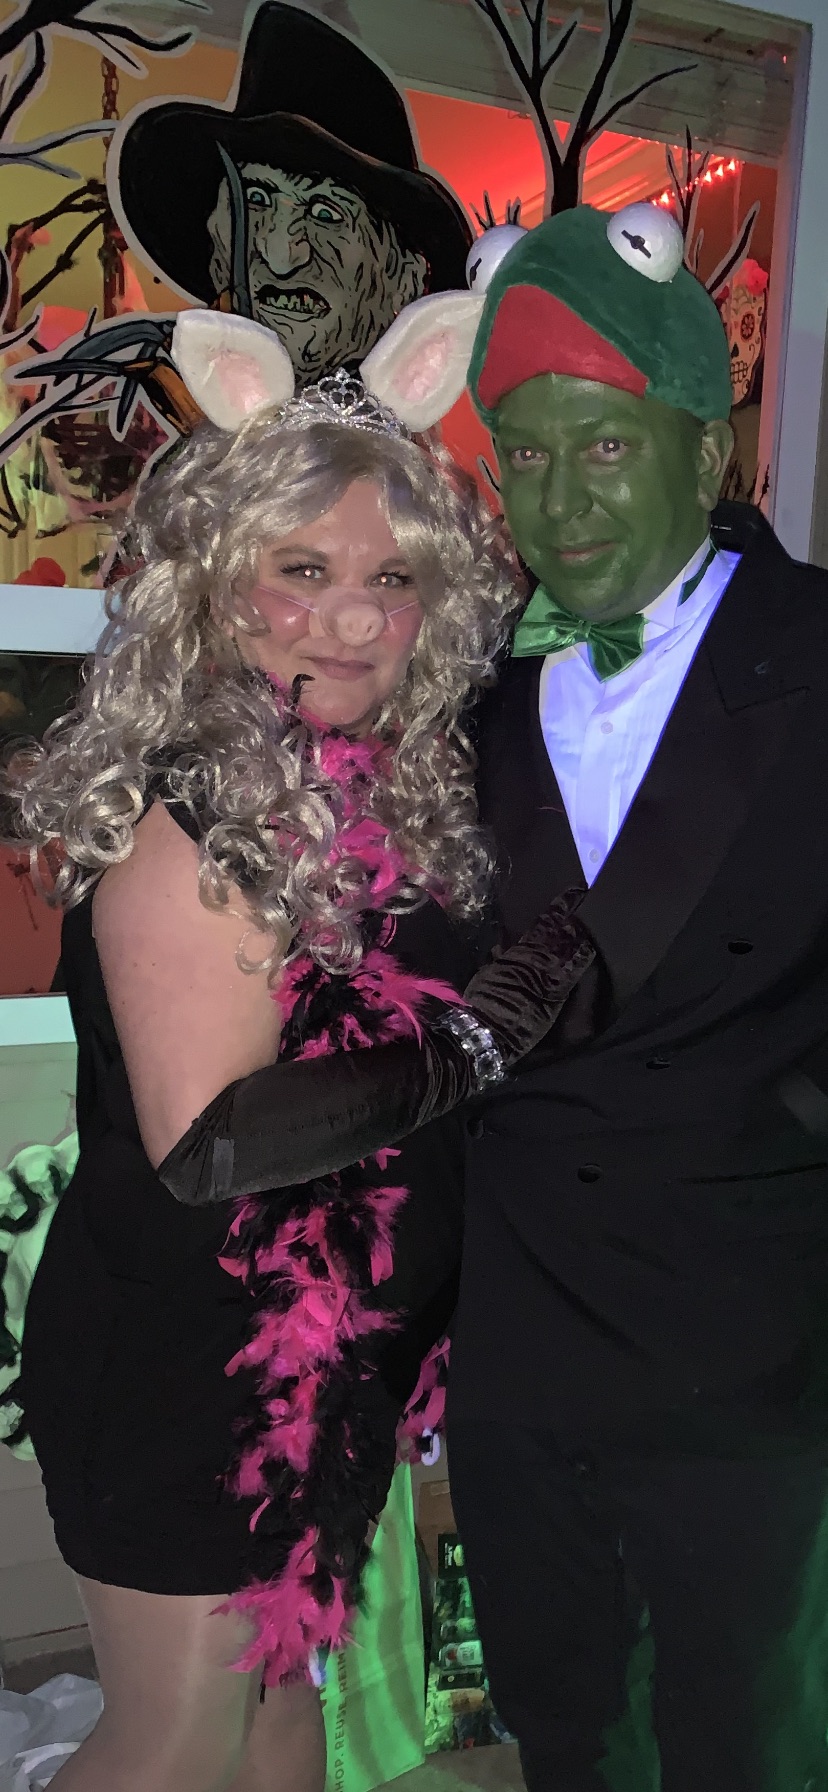 Kermit the frog and Miss Piggy